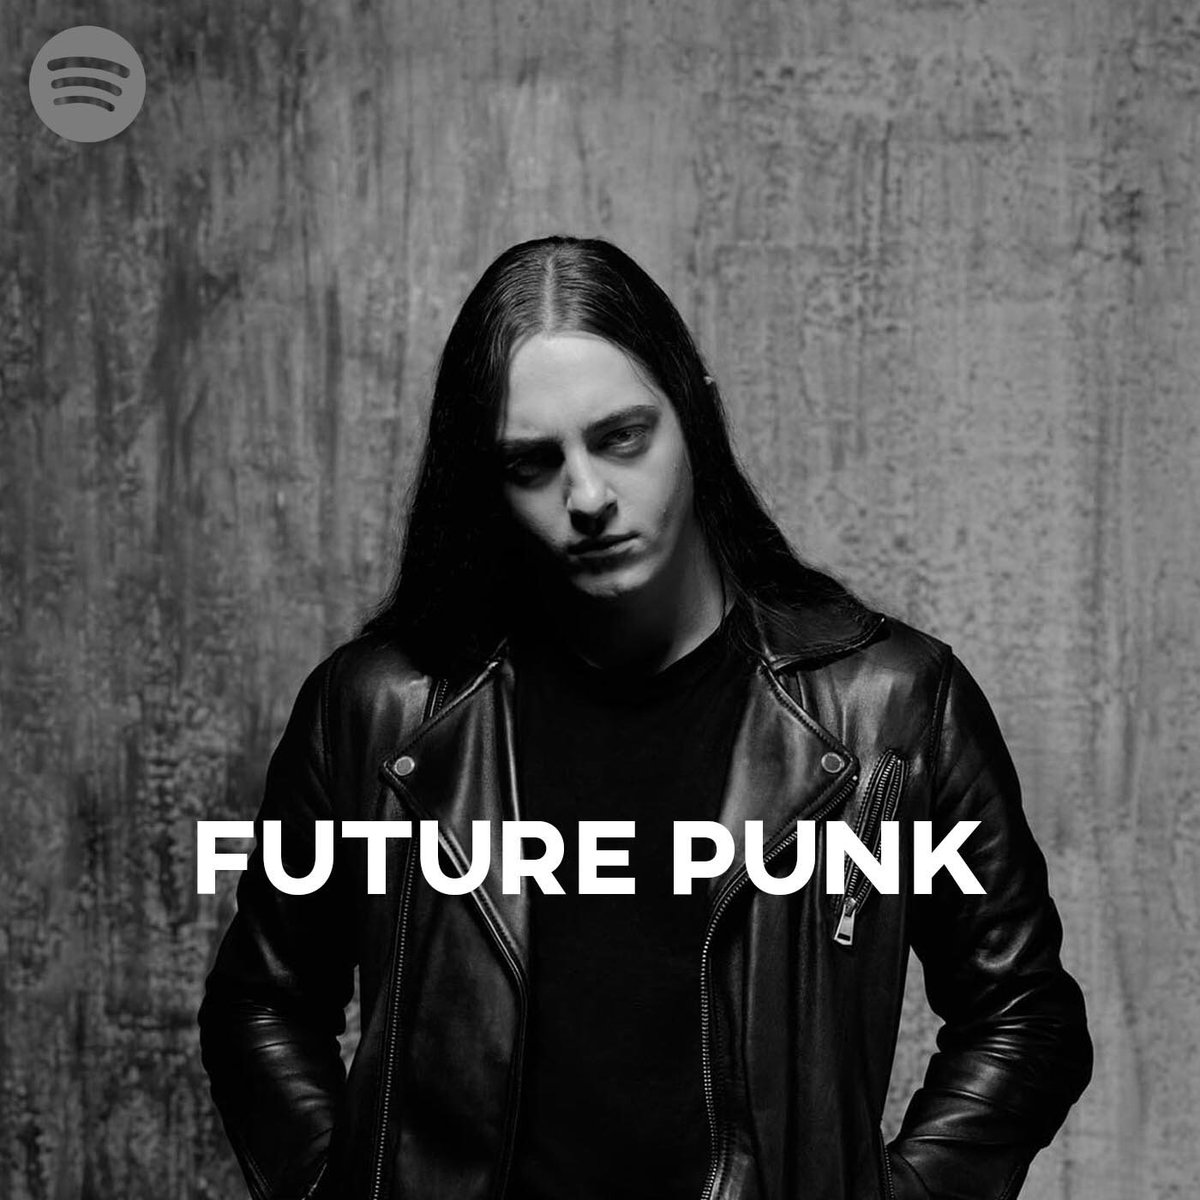 If you haven’t done so, go check this new #spotifyplaylist out. It’s got the goods. open.spotify.com/playlist/0duOv…